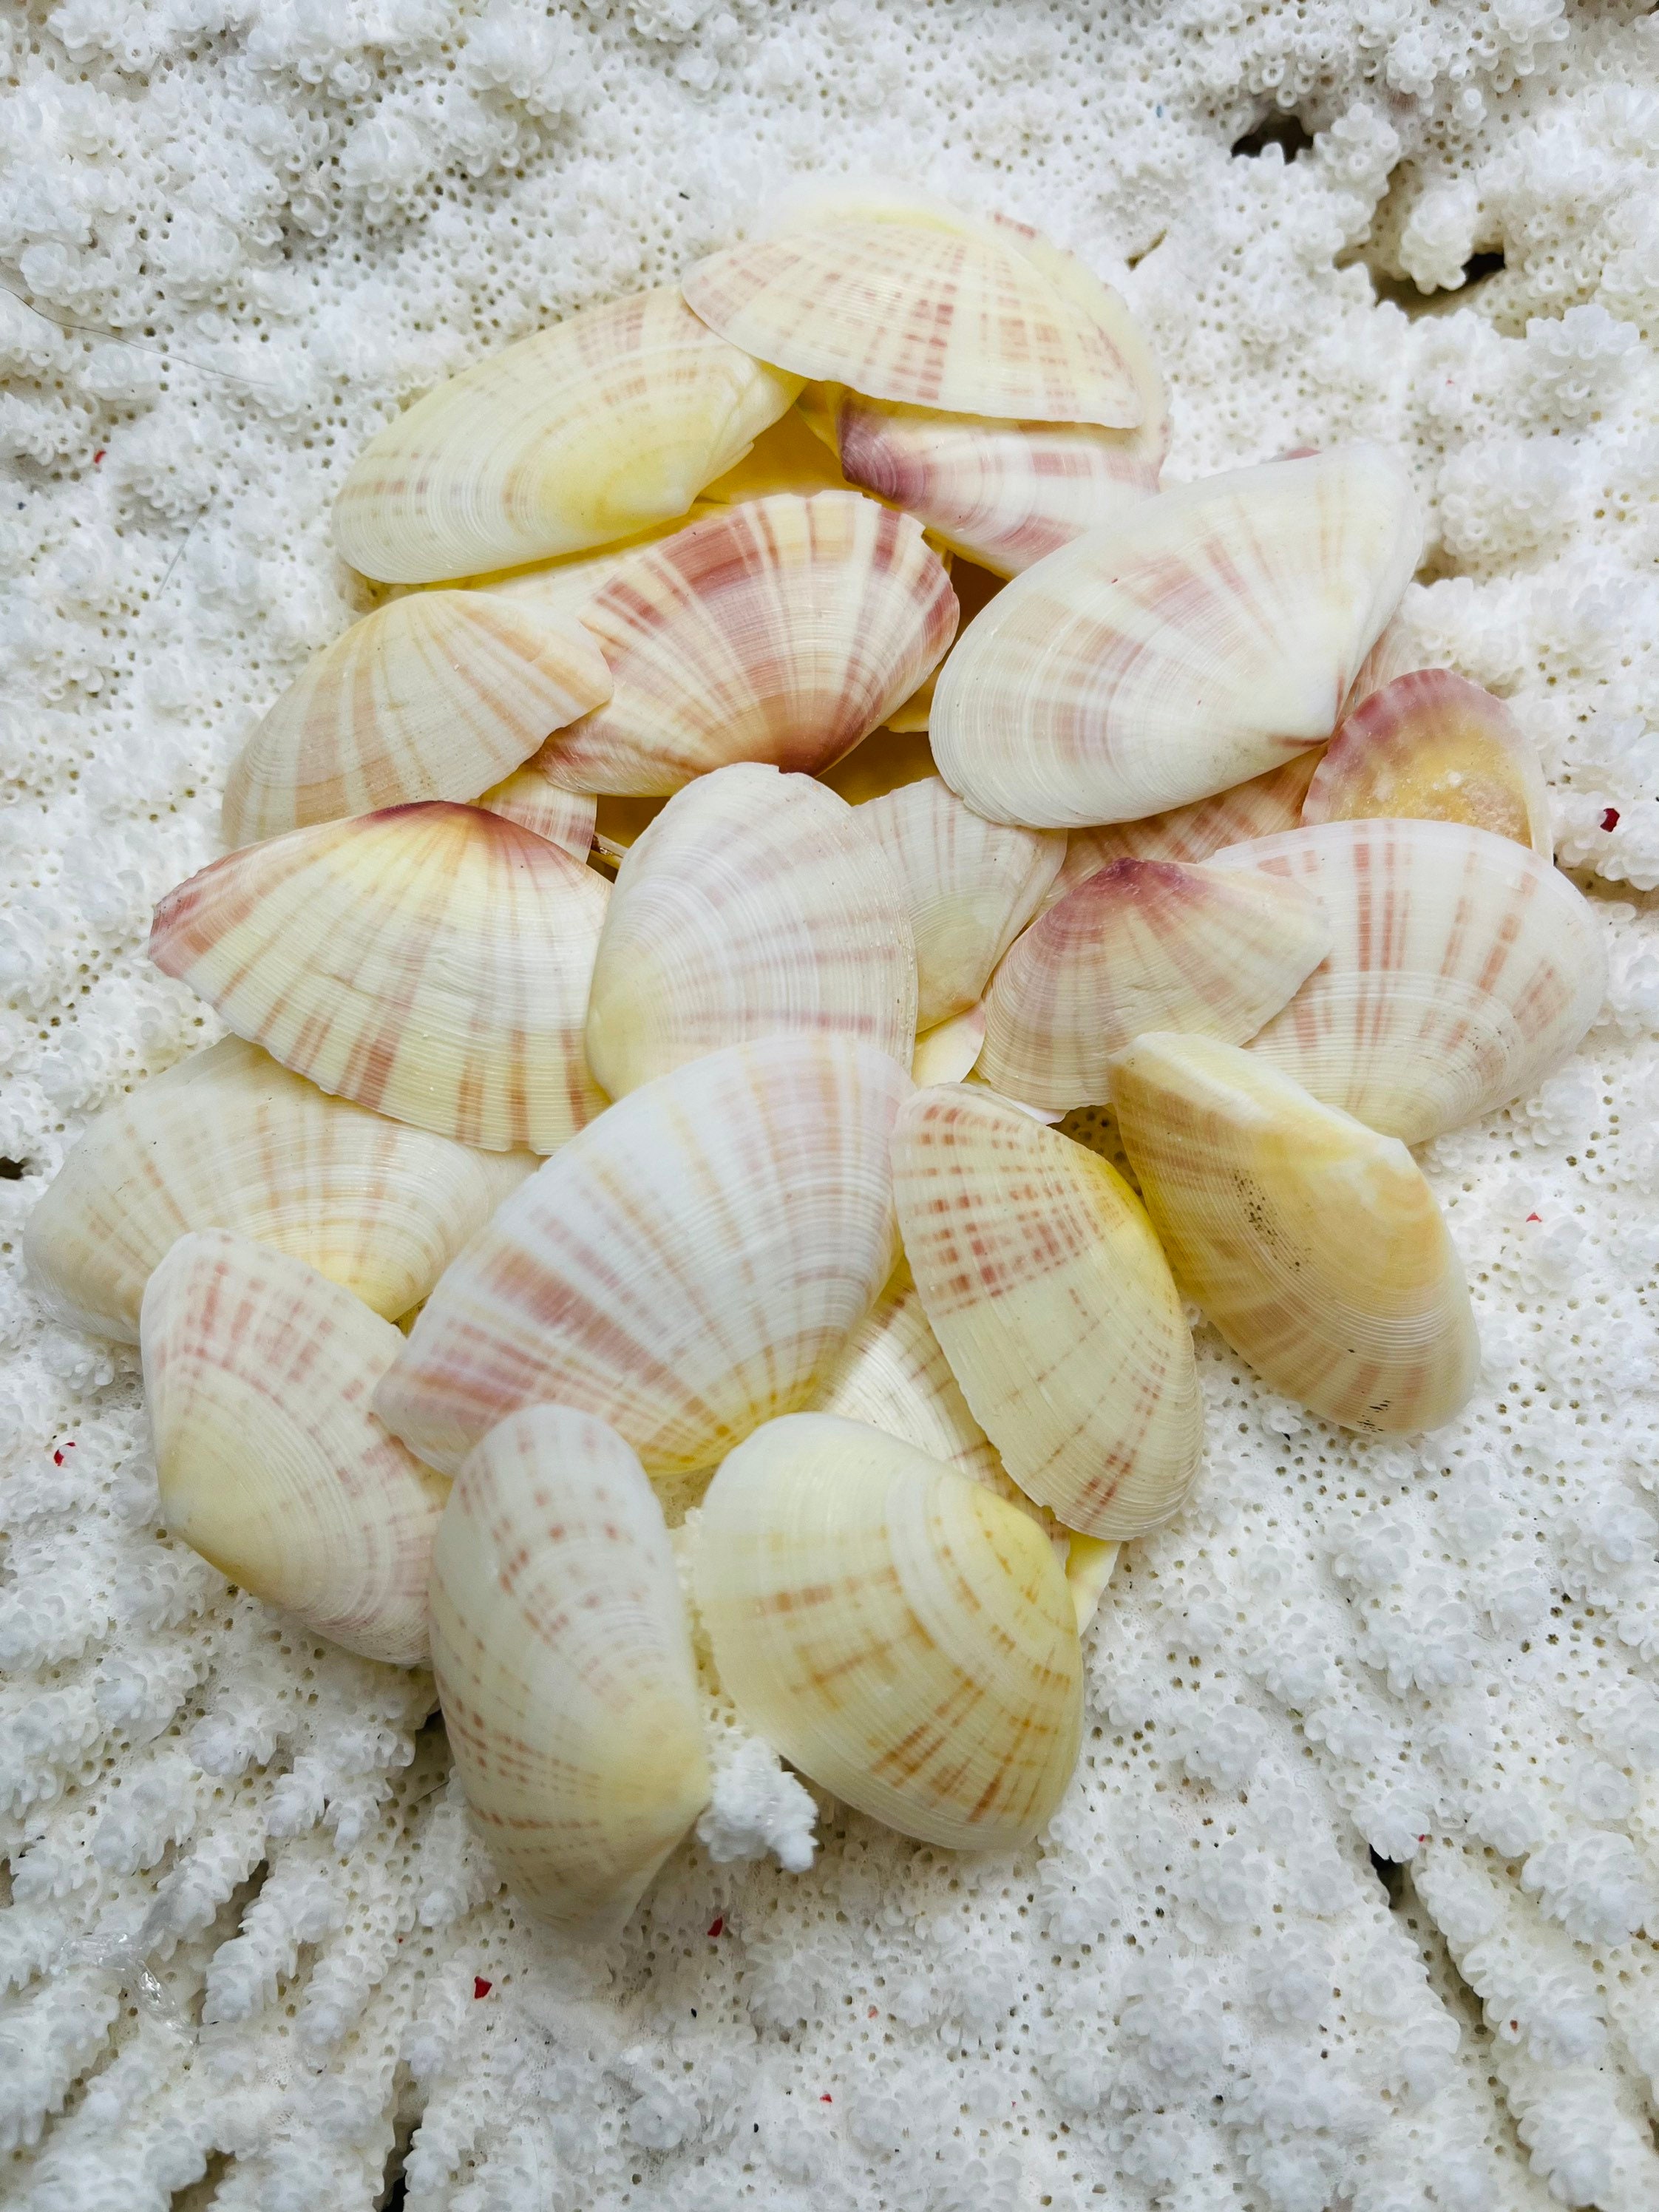 Assorted Seashells Handpicked from Florida, Sea Glass, Mixed 1/2 Pound,  Sanibel Island to Atlantic Coast, Shells for Crafting FREE SHIPPING!